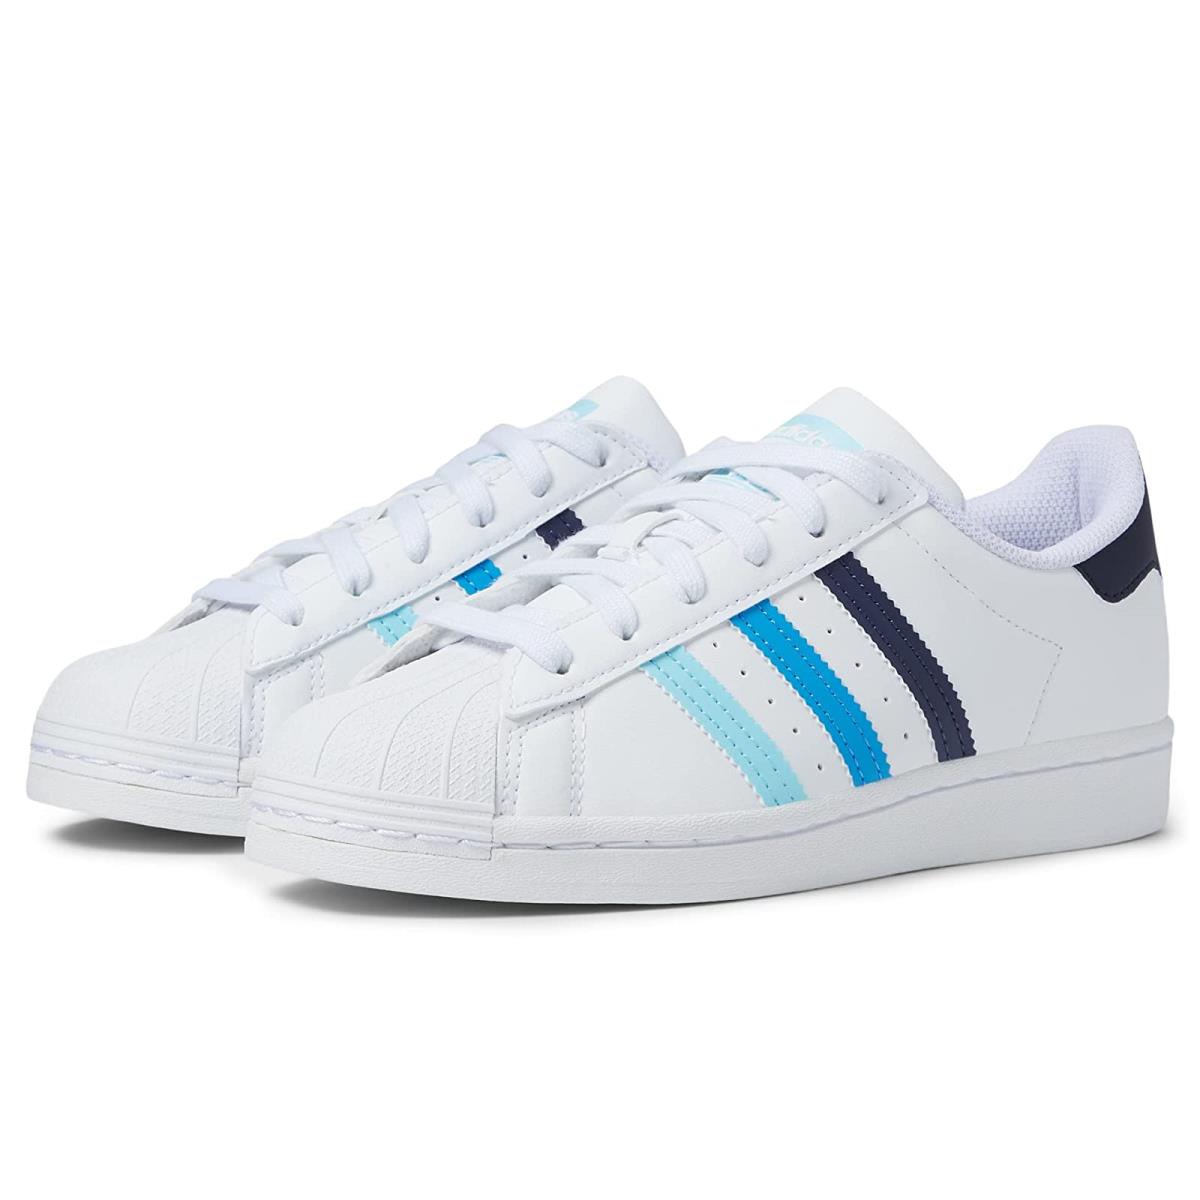 Boy`s Sneakers Athletic Shoes Adidas Originals Kids Superstar Big Kid White/Bliss Blue/Pulse Blue